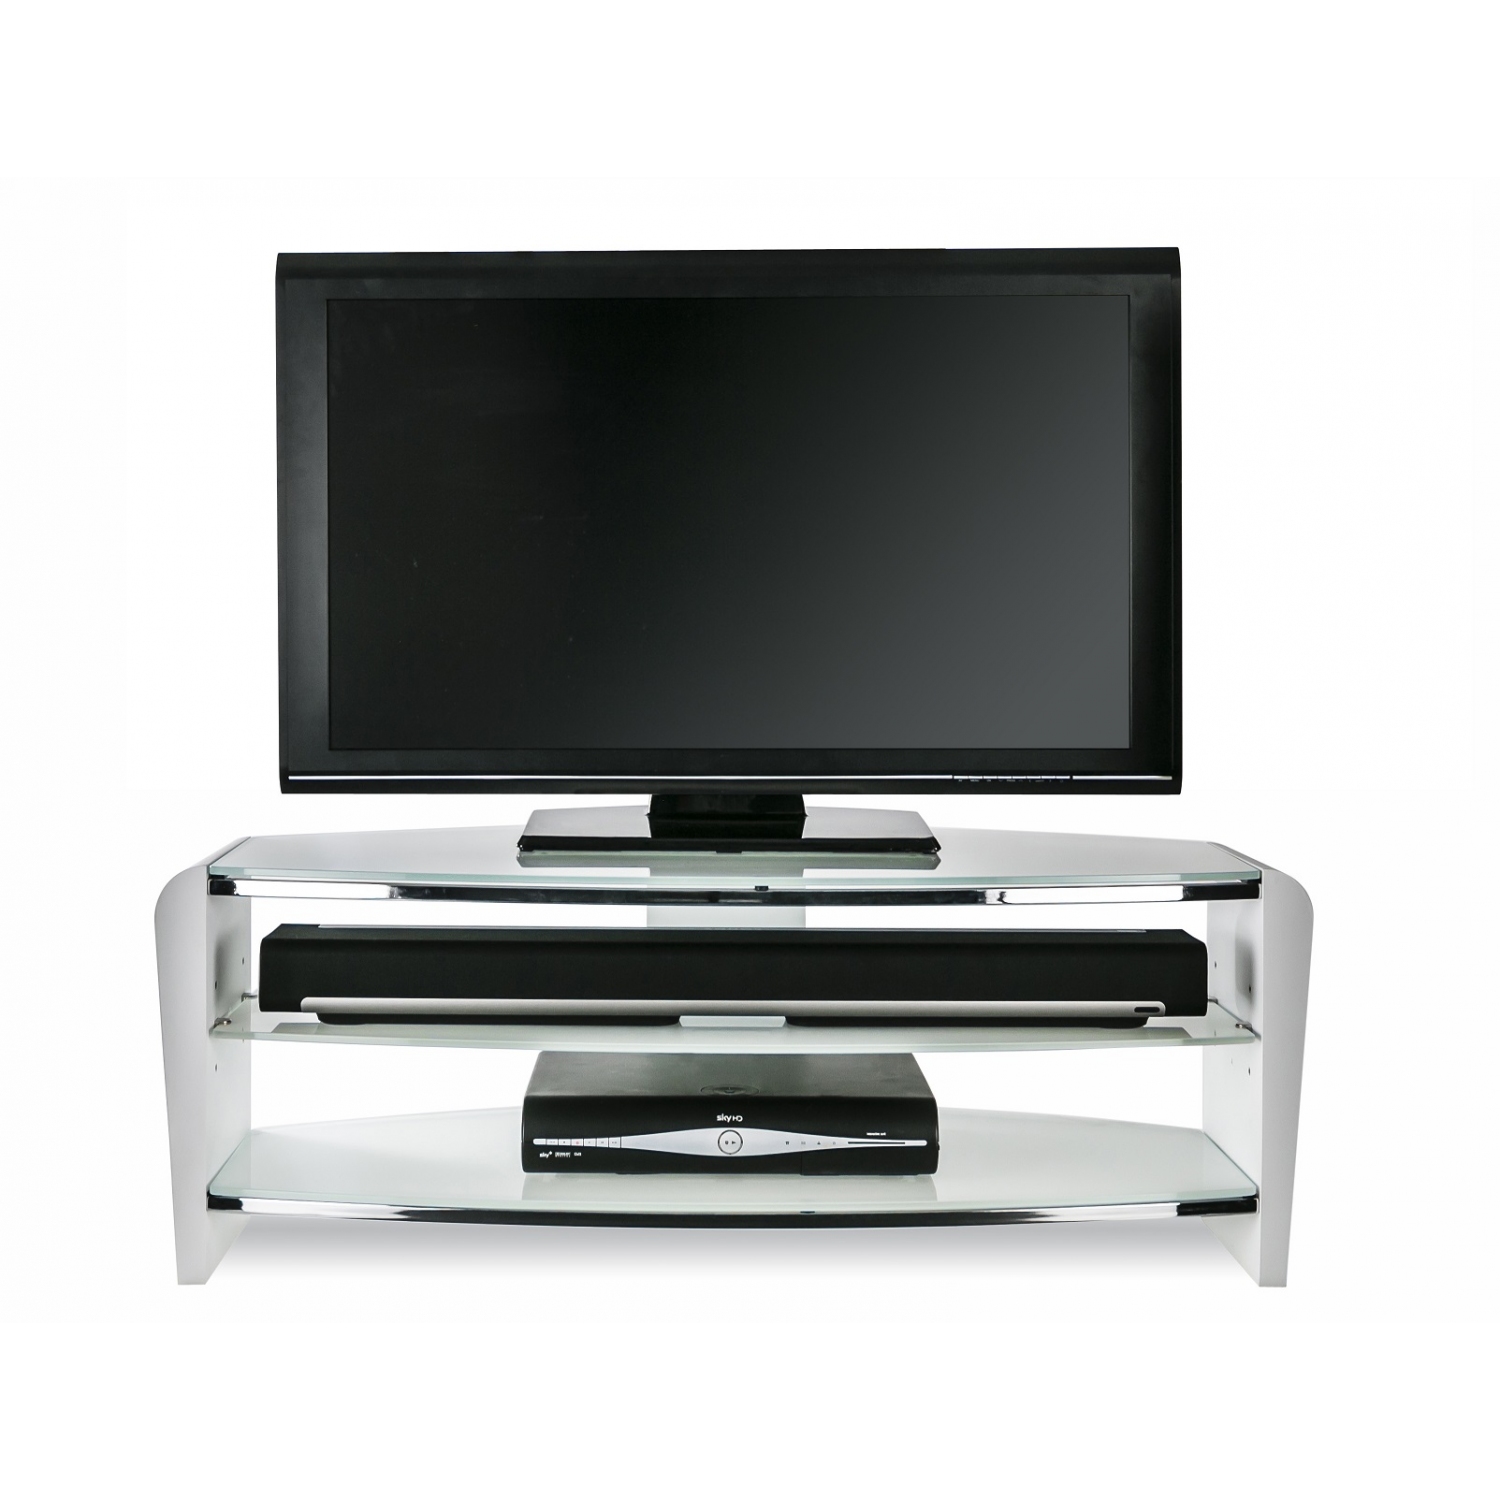 Alphason FRN1100 Francium 1100 | 3 Shelf TV Stand in White Supports/Arctic White Glass - 2